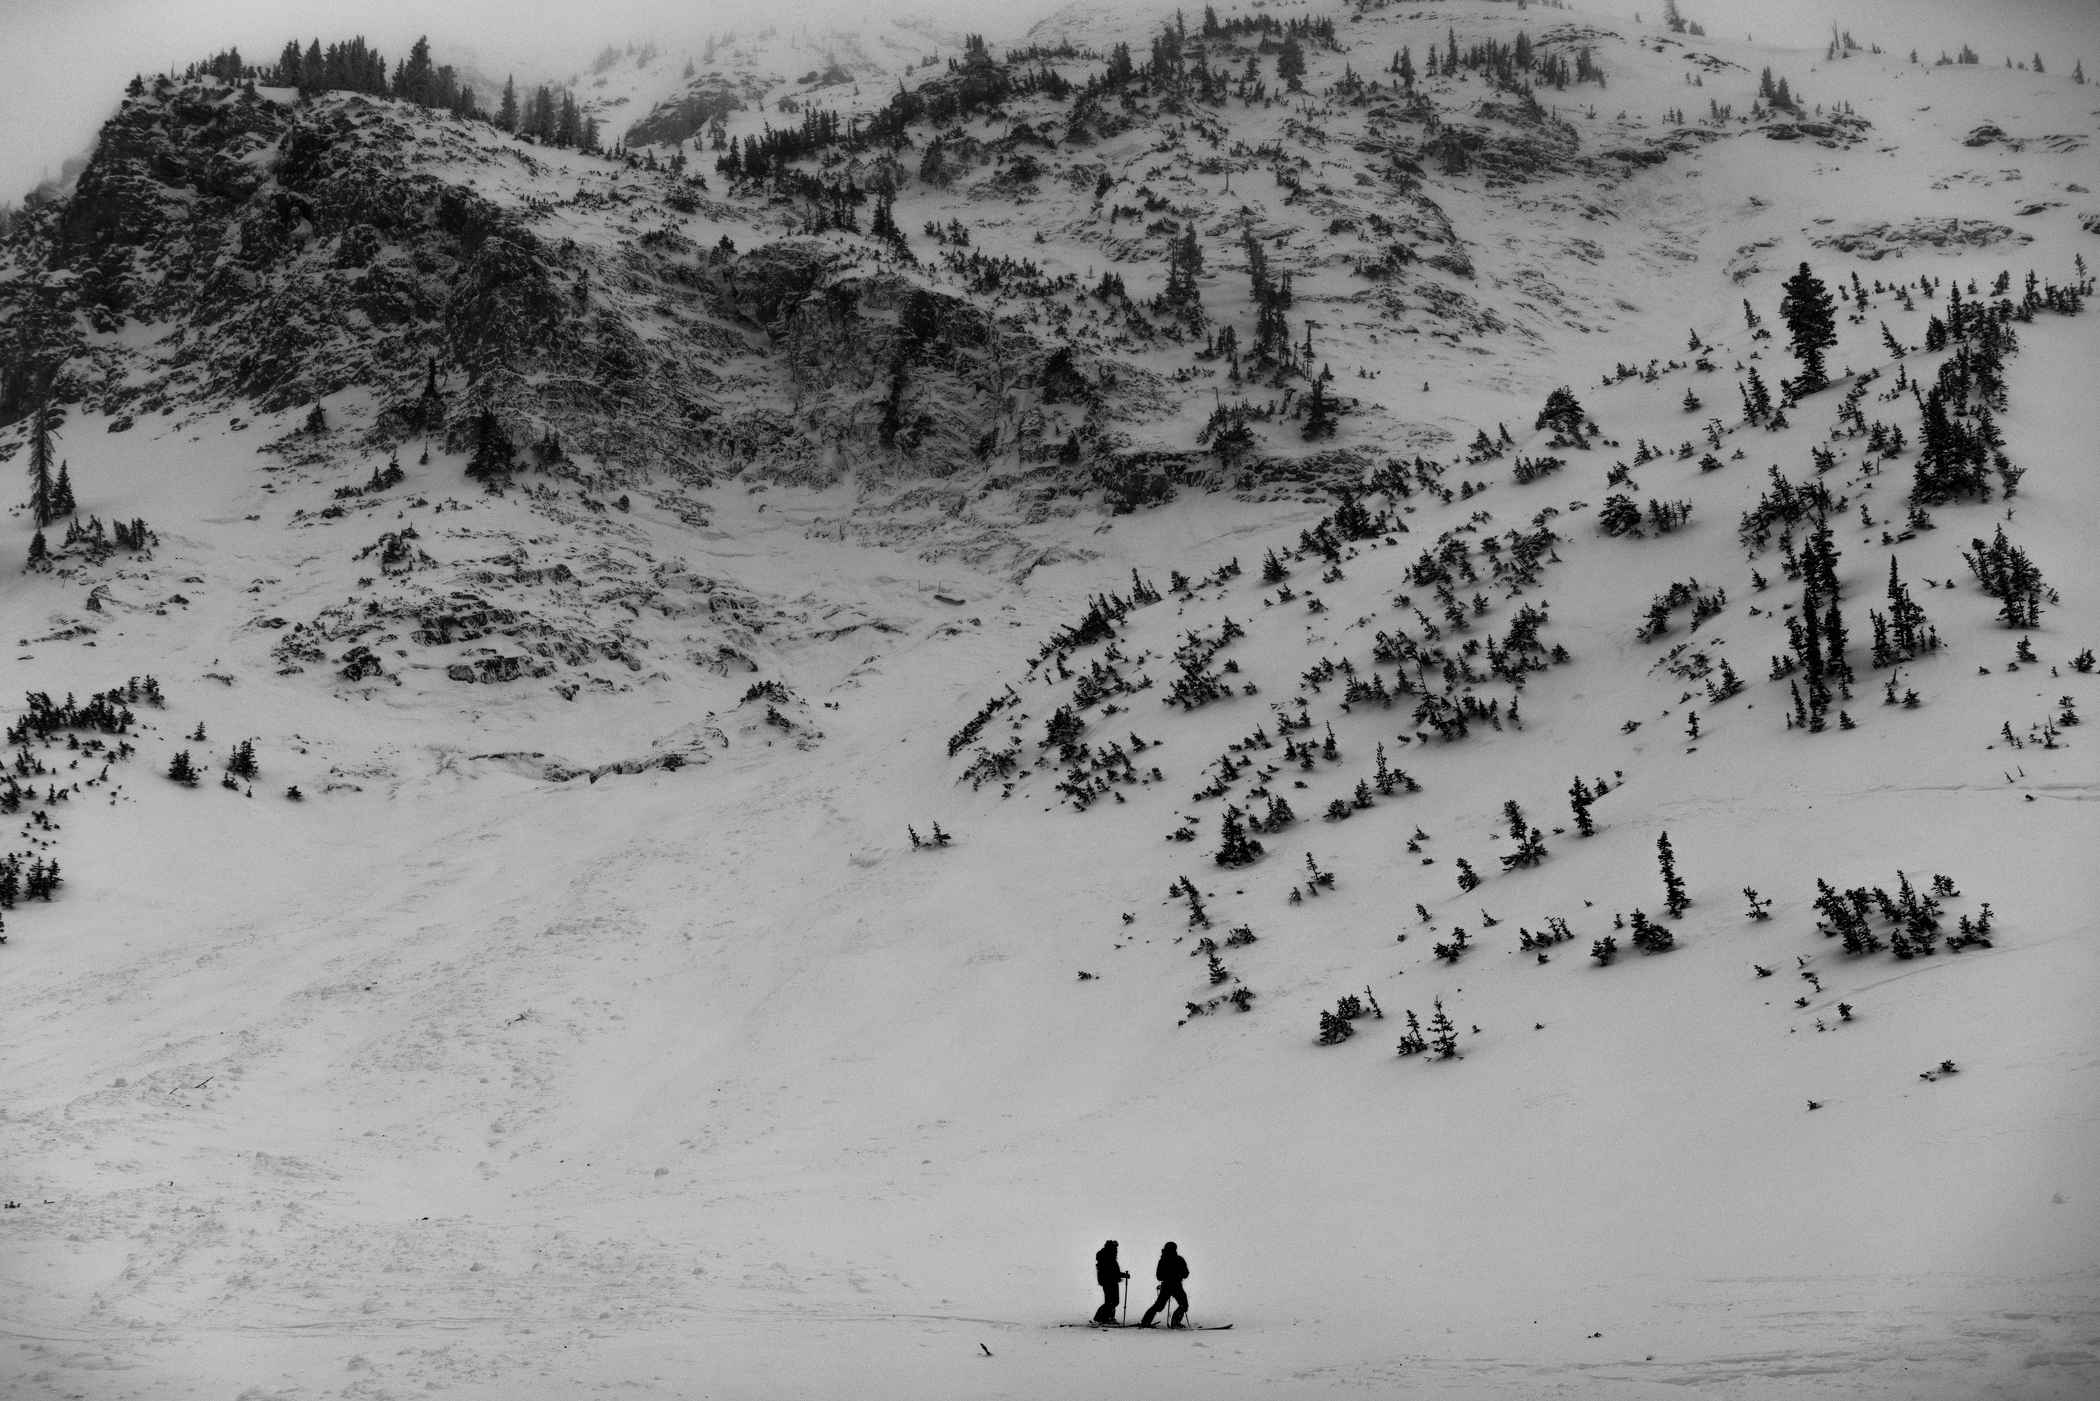 December 31st, 2021: Alta patrollers inspect the Mount Baldy avalanche | Photo: Rocko Menzyk